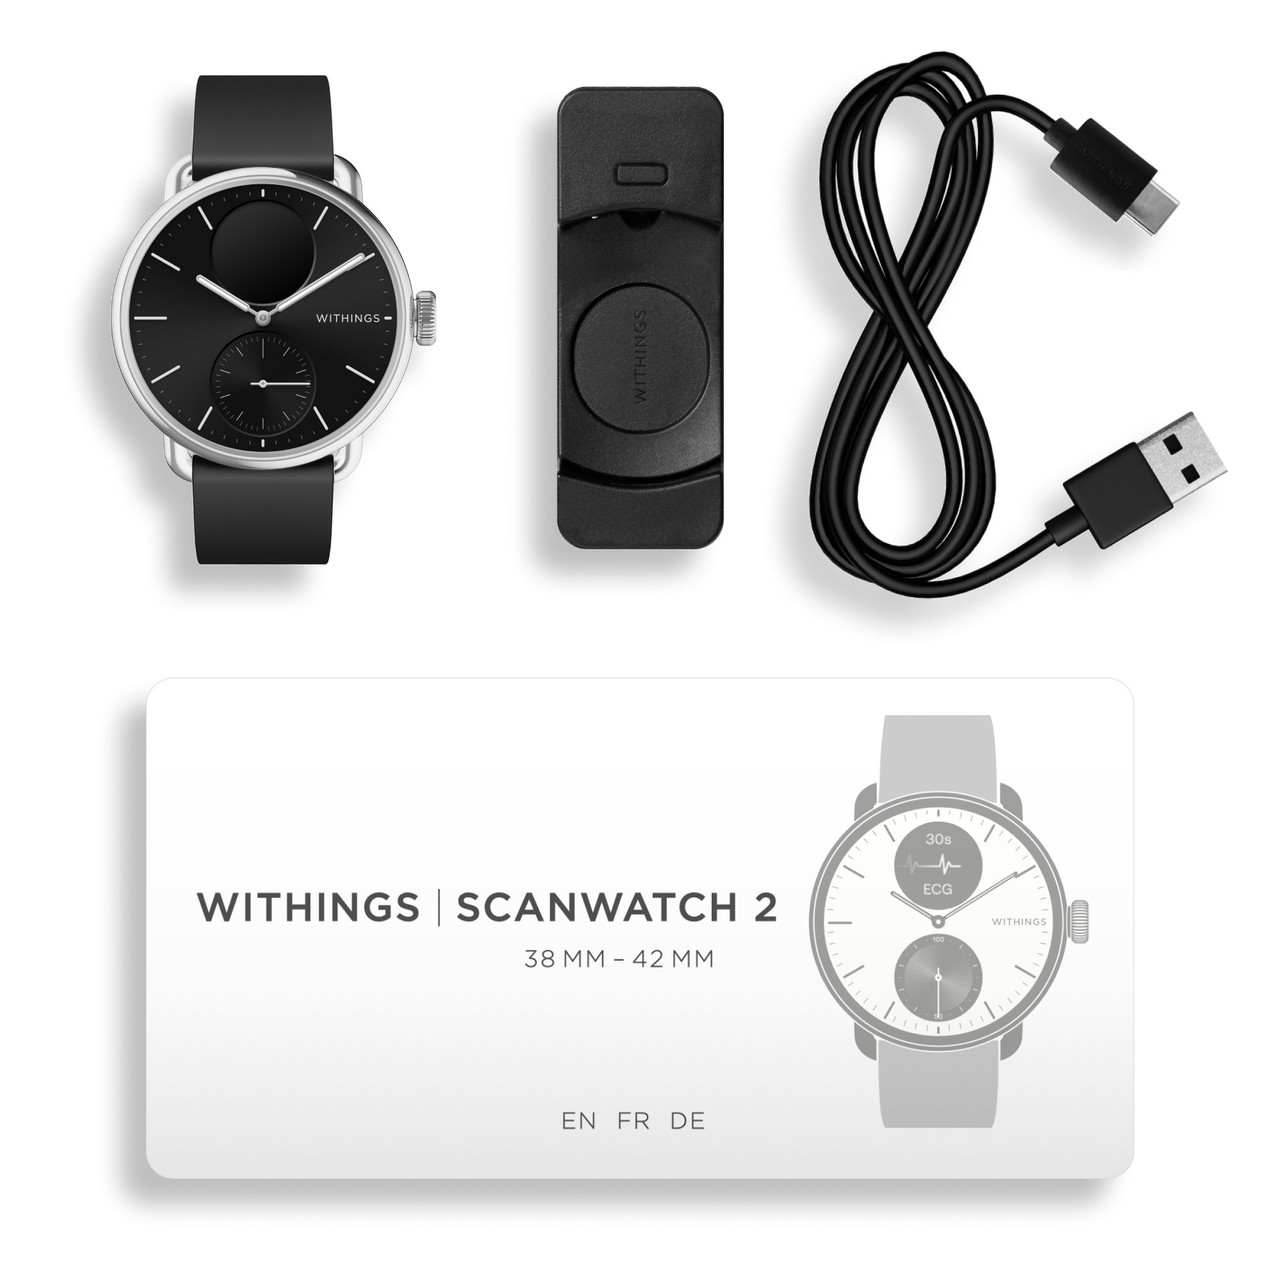 Withings ScanWatch 2 hands-on: New hybrid smartwatch comes with 24/7  temperature tracking